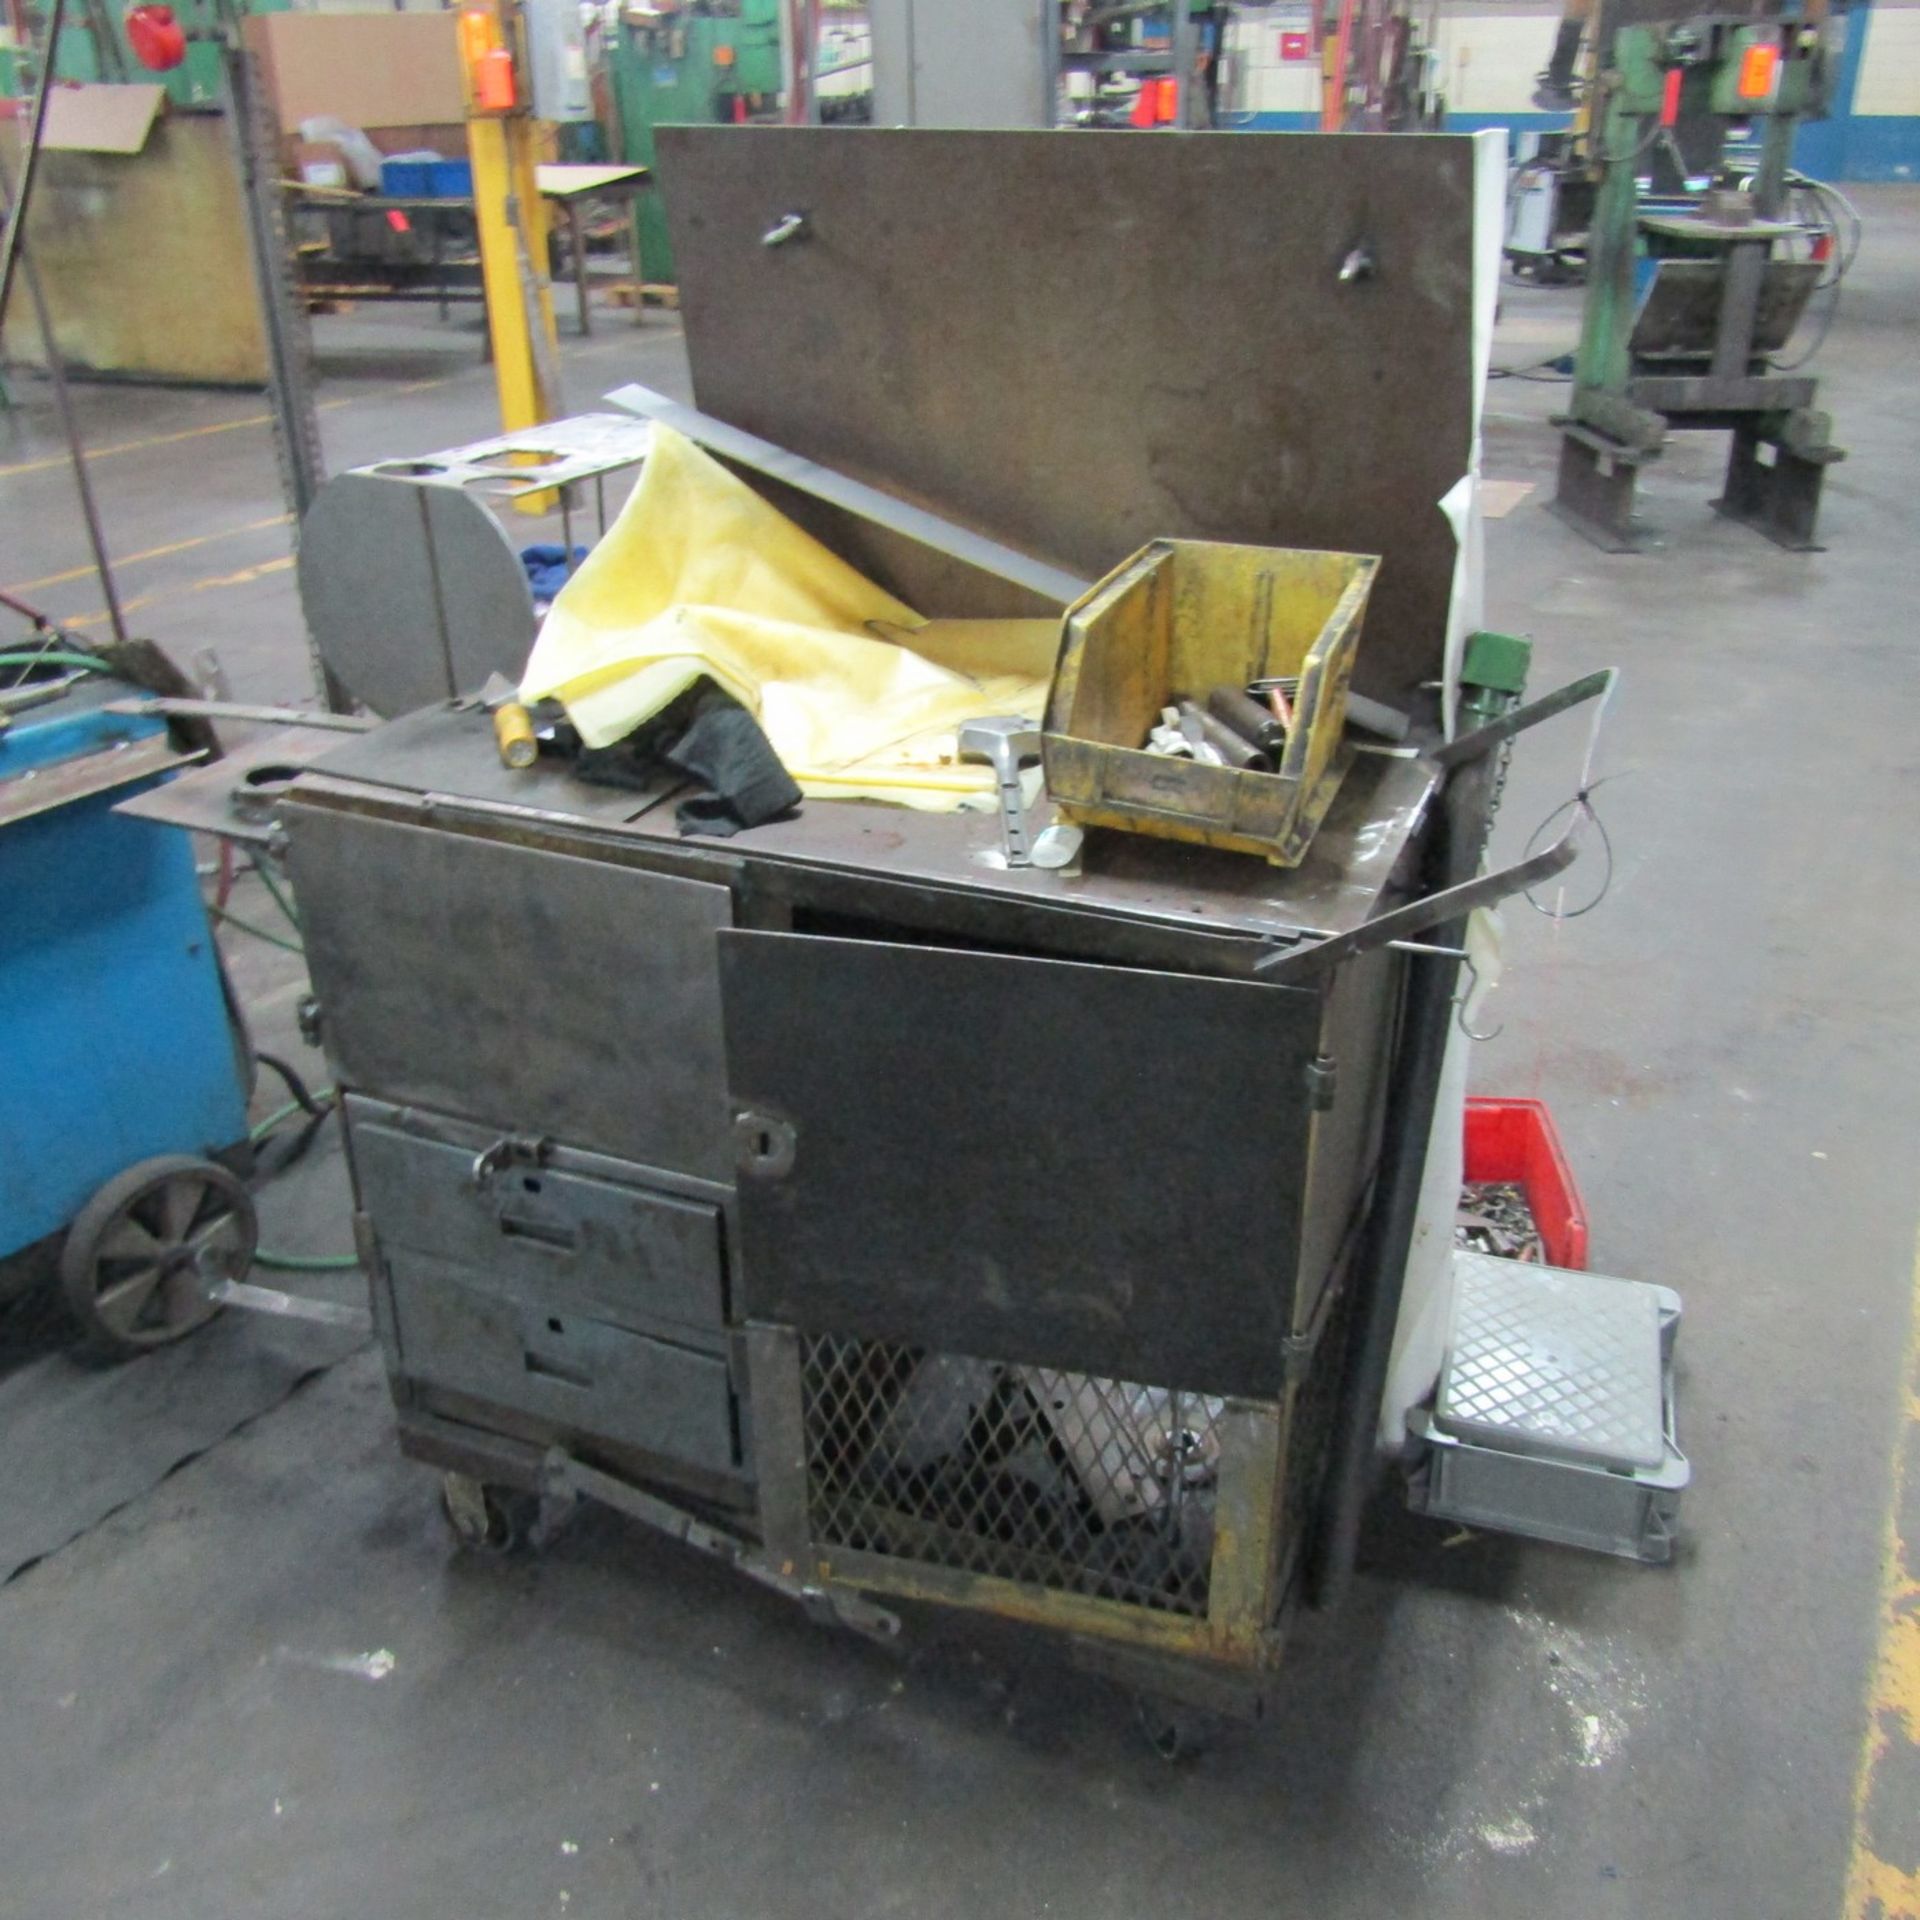 Lot - Assorted Shelving Units, Welding Carts, and Welding Tables - Image 3 of 6